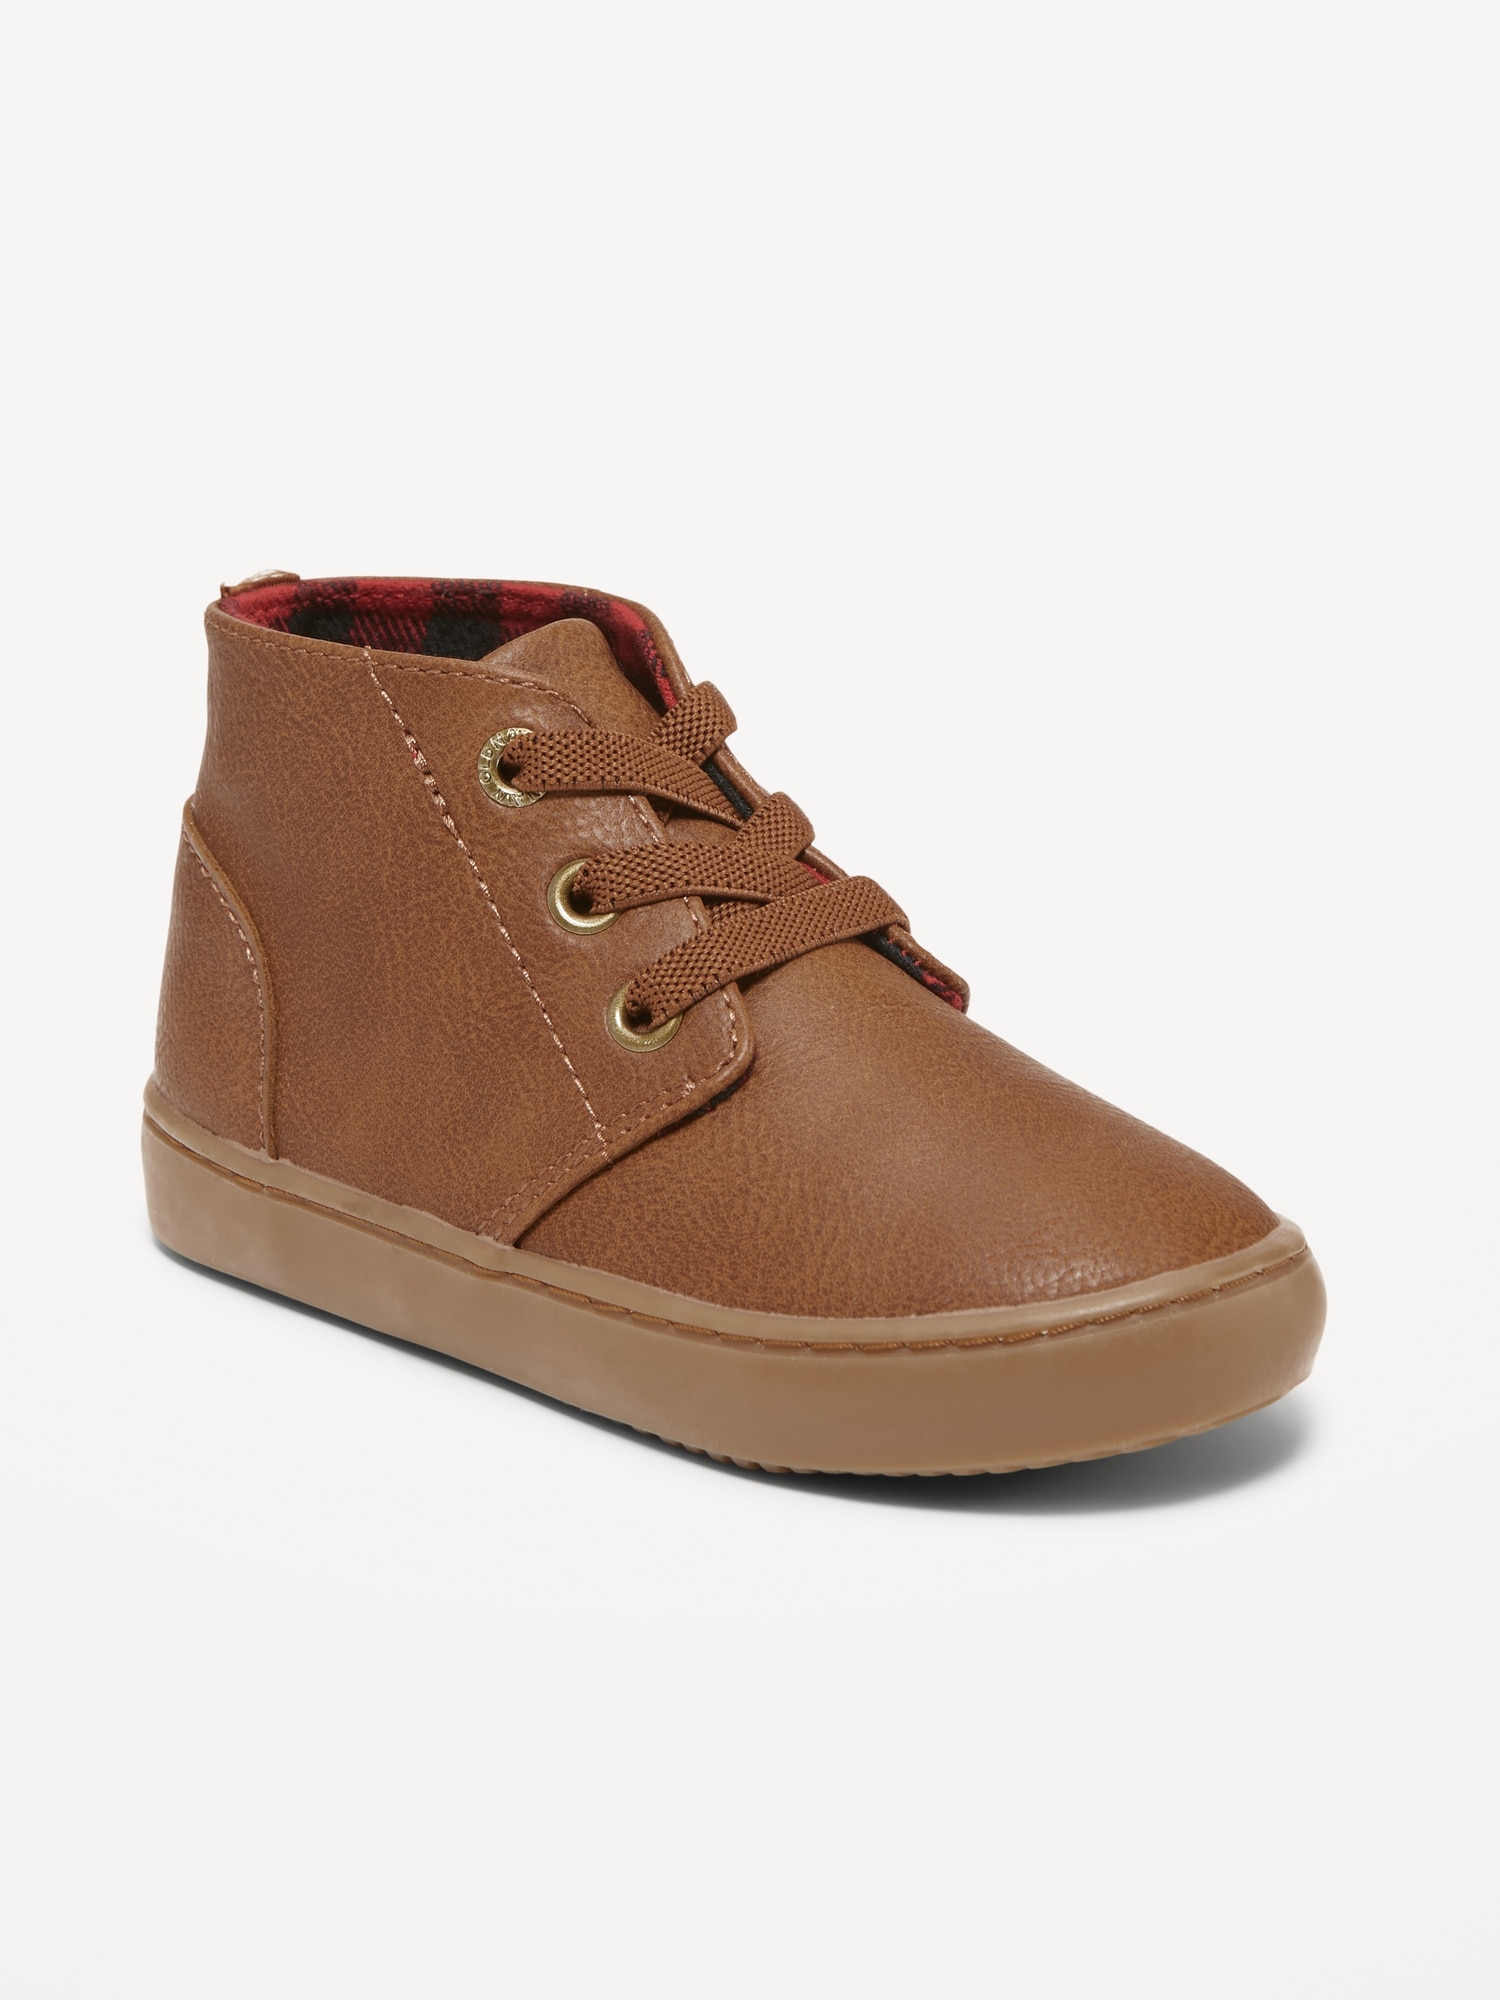 Faux-Leather Sneaker Boots for Toddler Boys